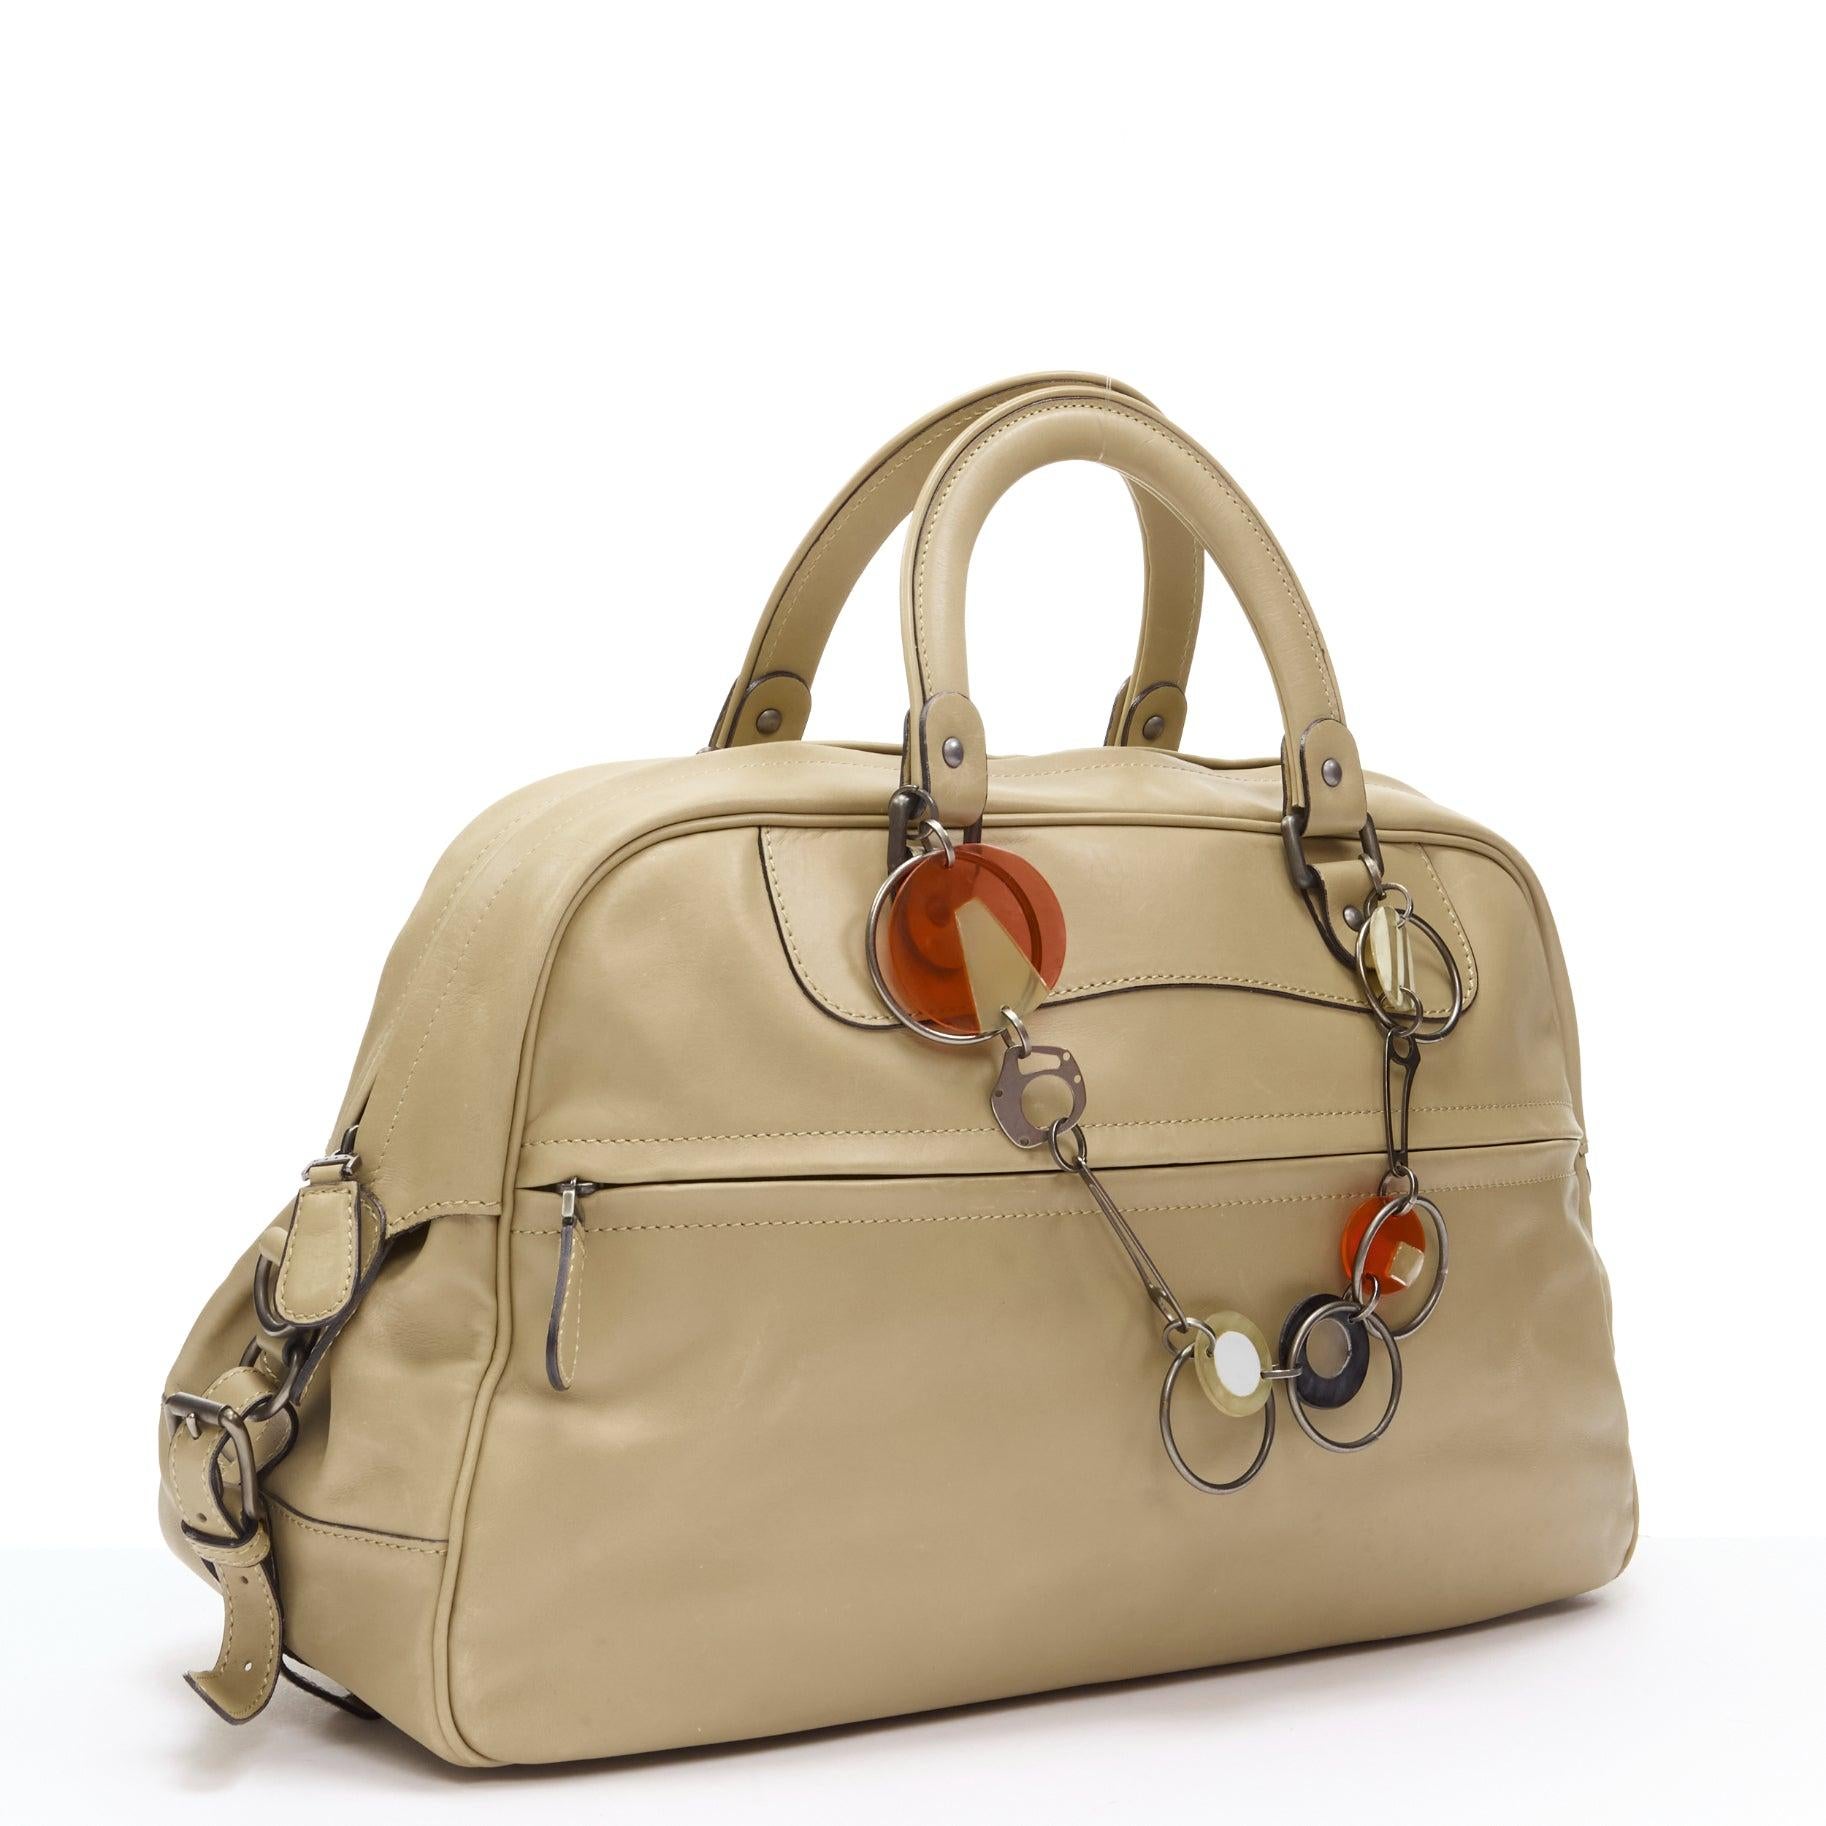 MARNI tan brown leather resin metal chain large weekend bowling boston bag
Reference: CELG/A00024
Brand: Marni
Model: Weekender bowling bag
Material: Leather
Color: Brown
Pattern: Solid
Closure: Zip
Lining: Fabric
Extra Details: Decorative chain